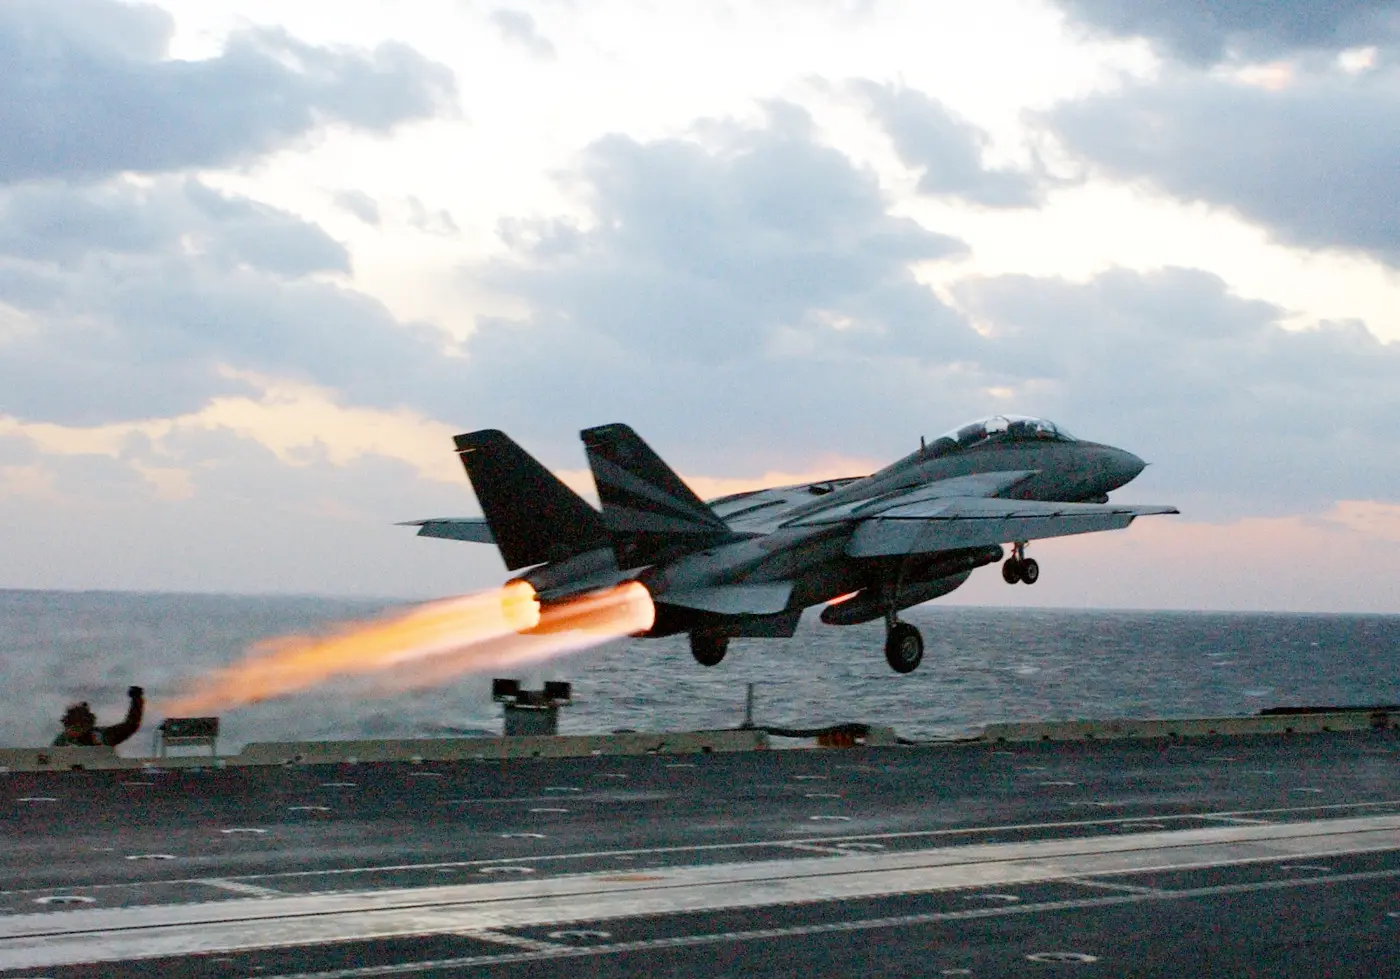 Learn more about the F-14 top speed.